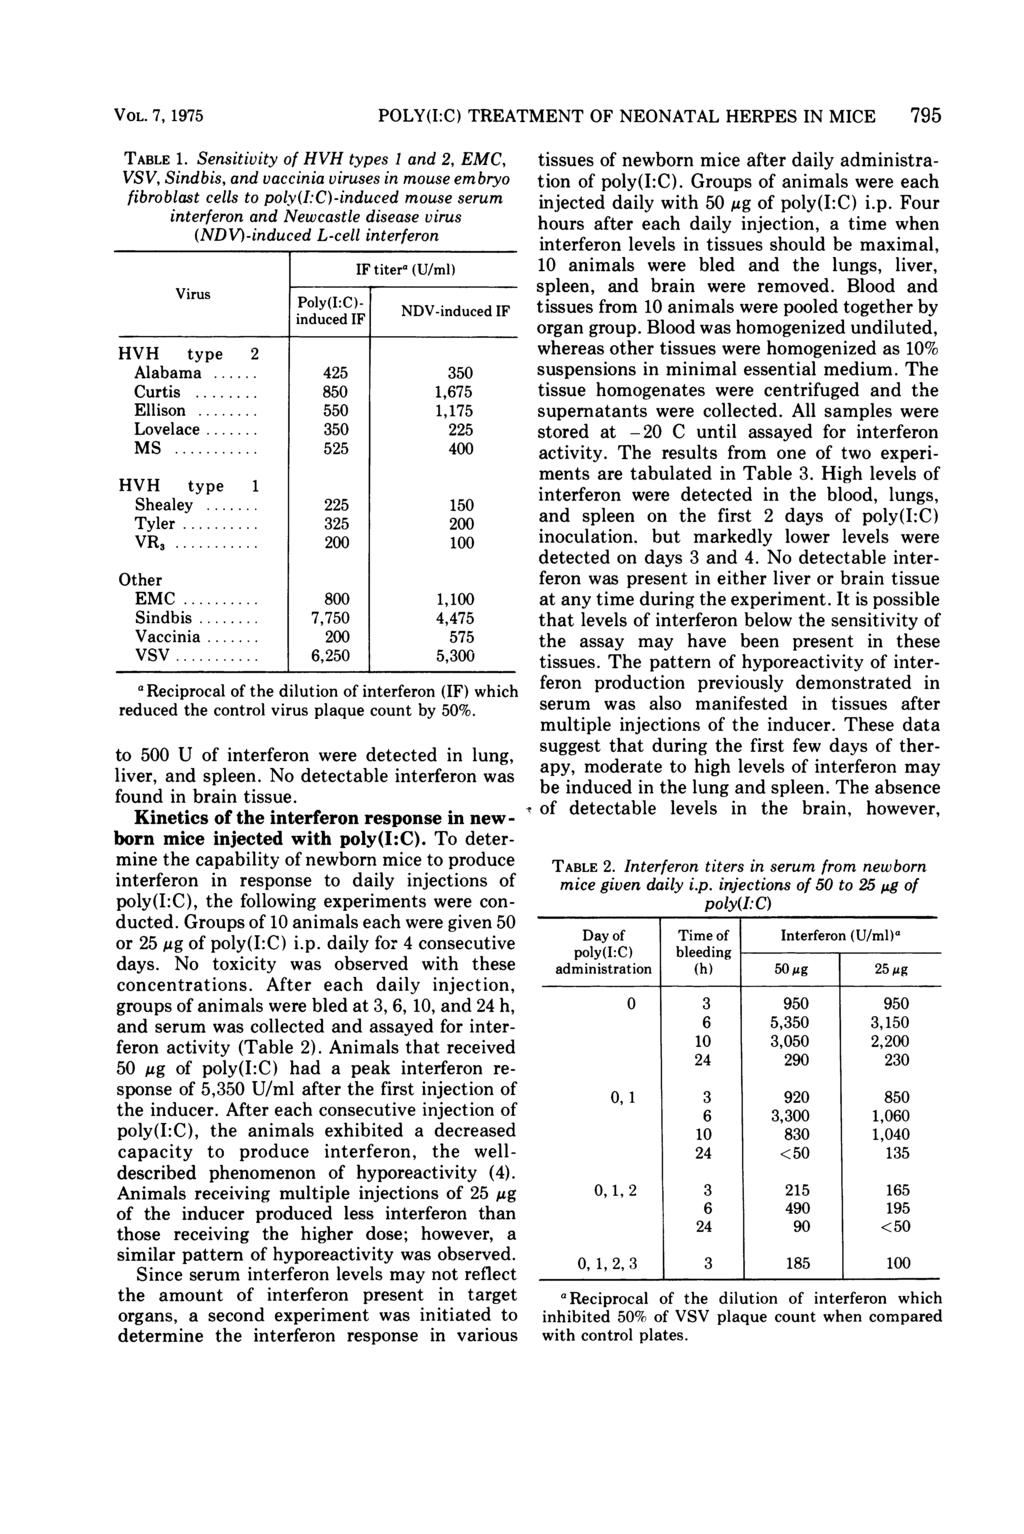 VOL. 7, 1975 POLY(I:C) TREATMENT OF NEONATAL HERPES IN MICE 795 TABLE 1.